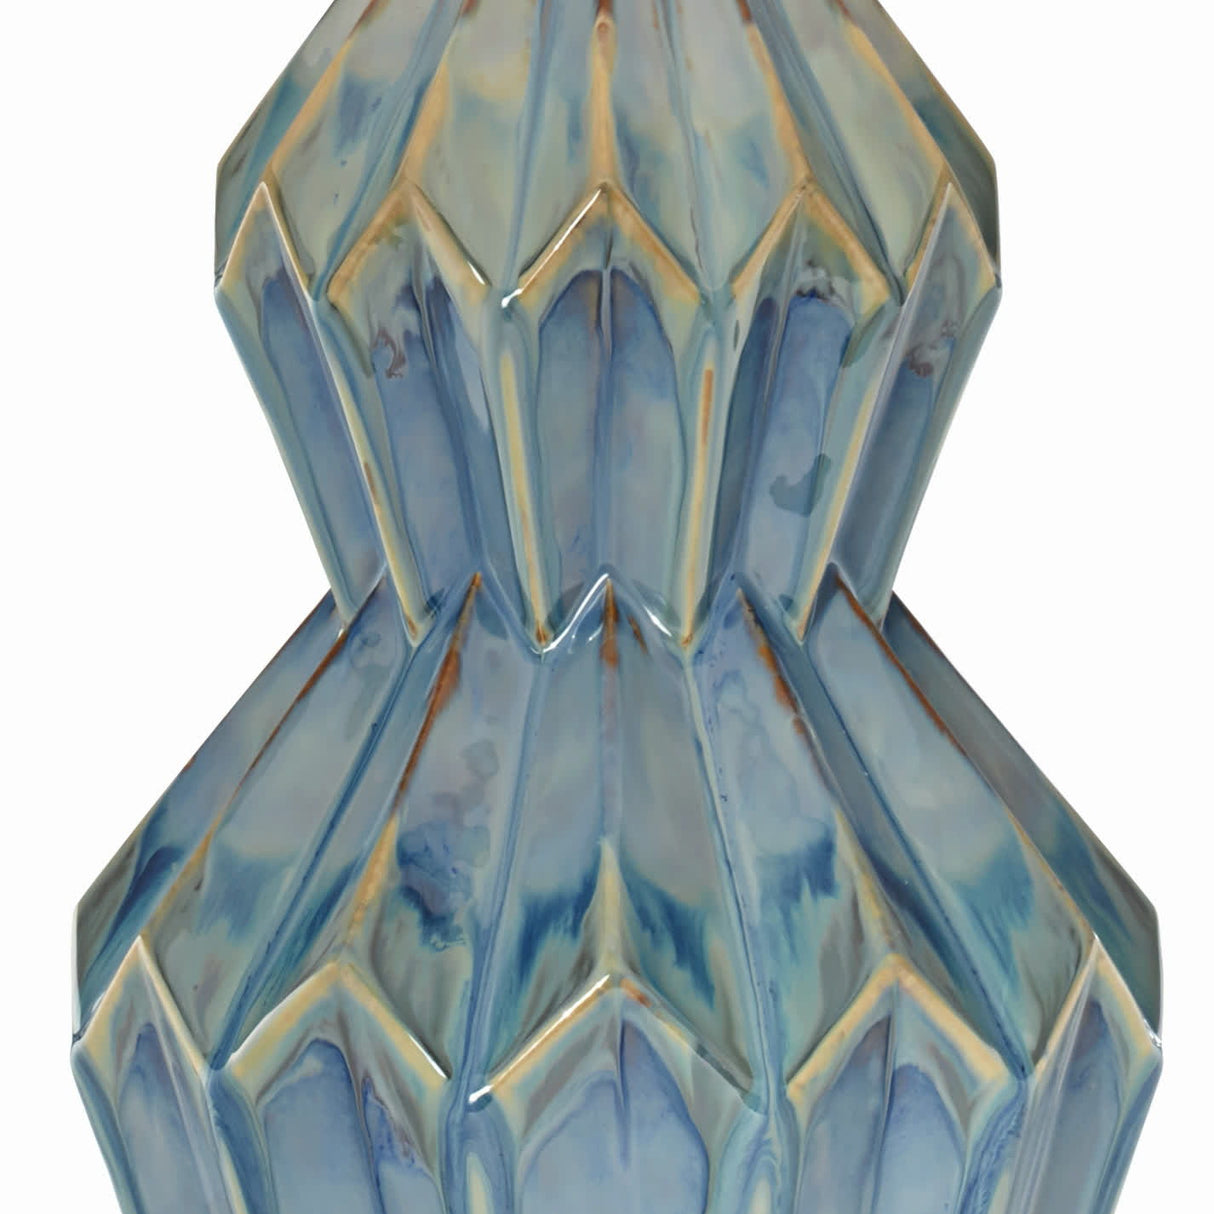 Avalon - Table Lamp - Turquoise